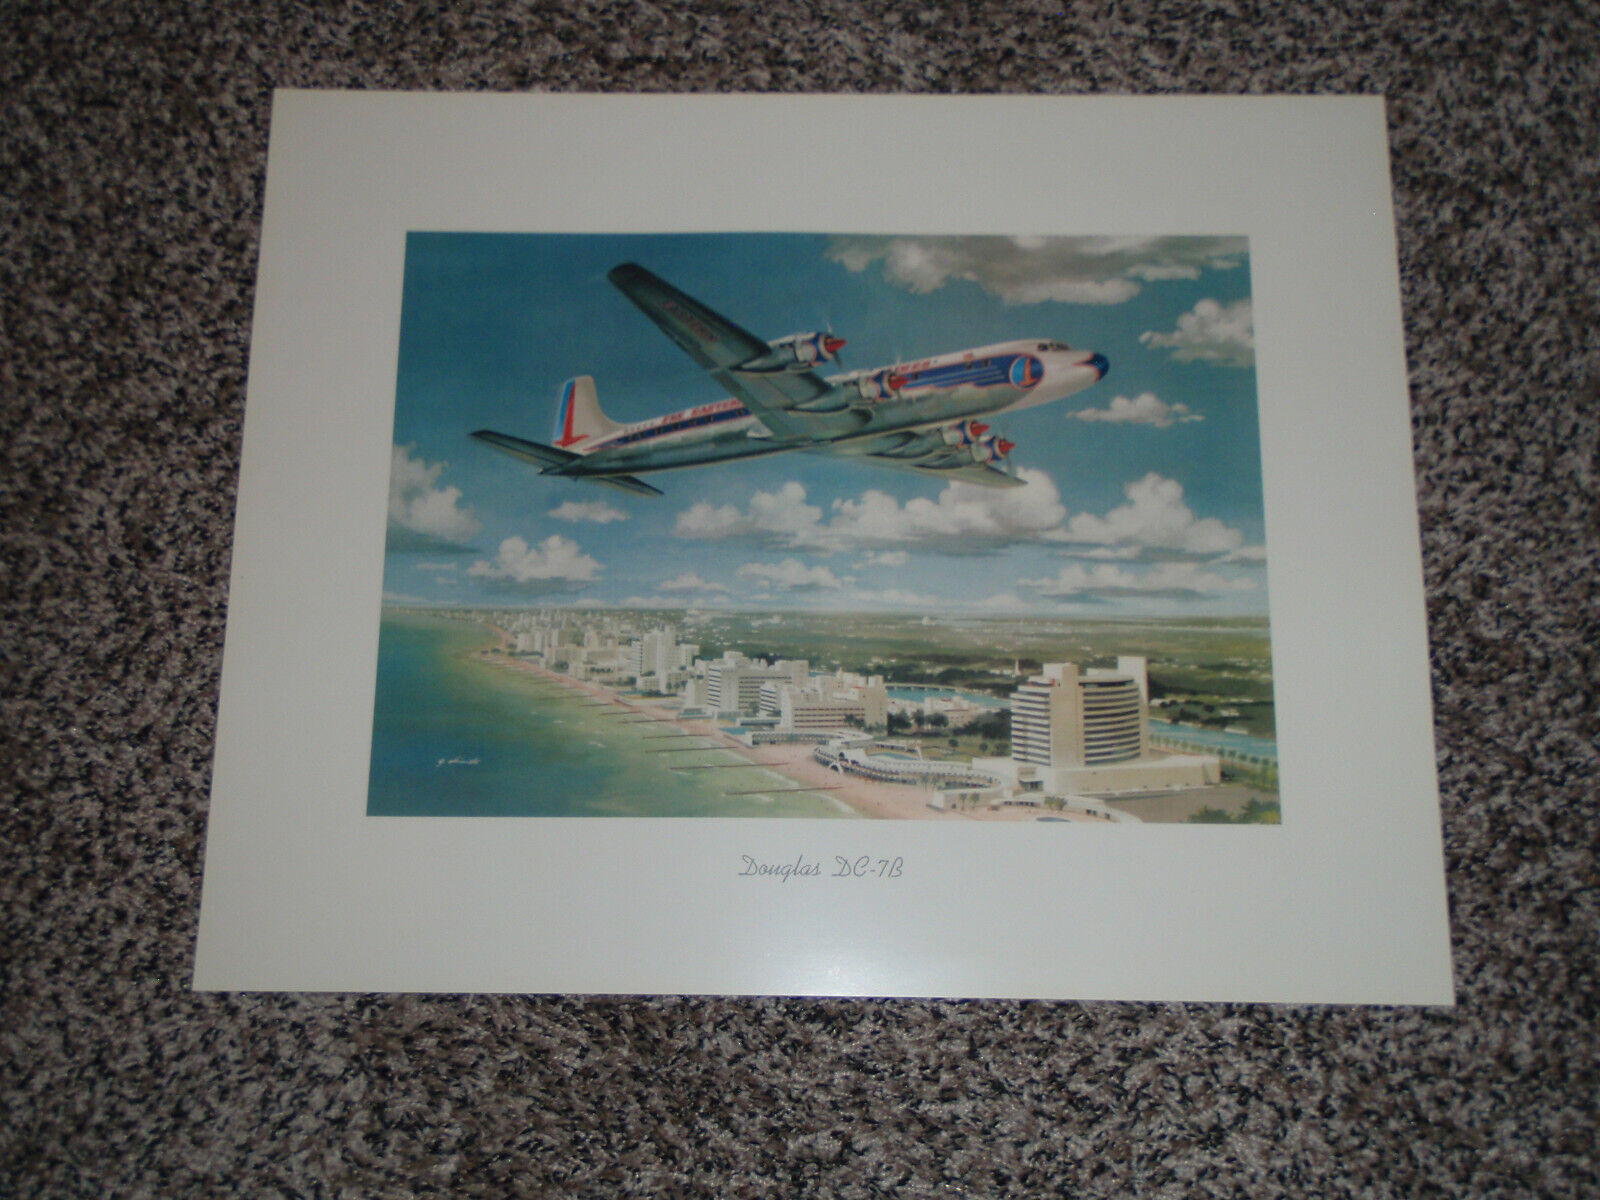 OLD EASTERN AIRLINES DOUGLAS DC-7B LITHOGRAPH PRINT